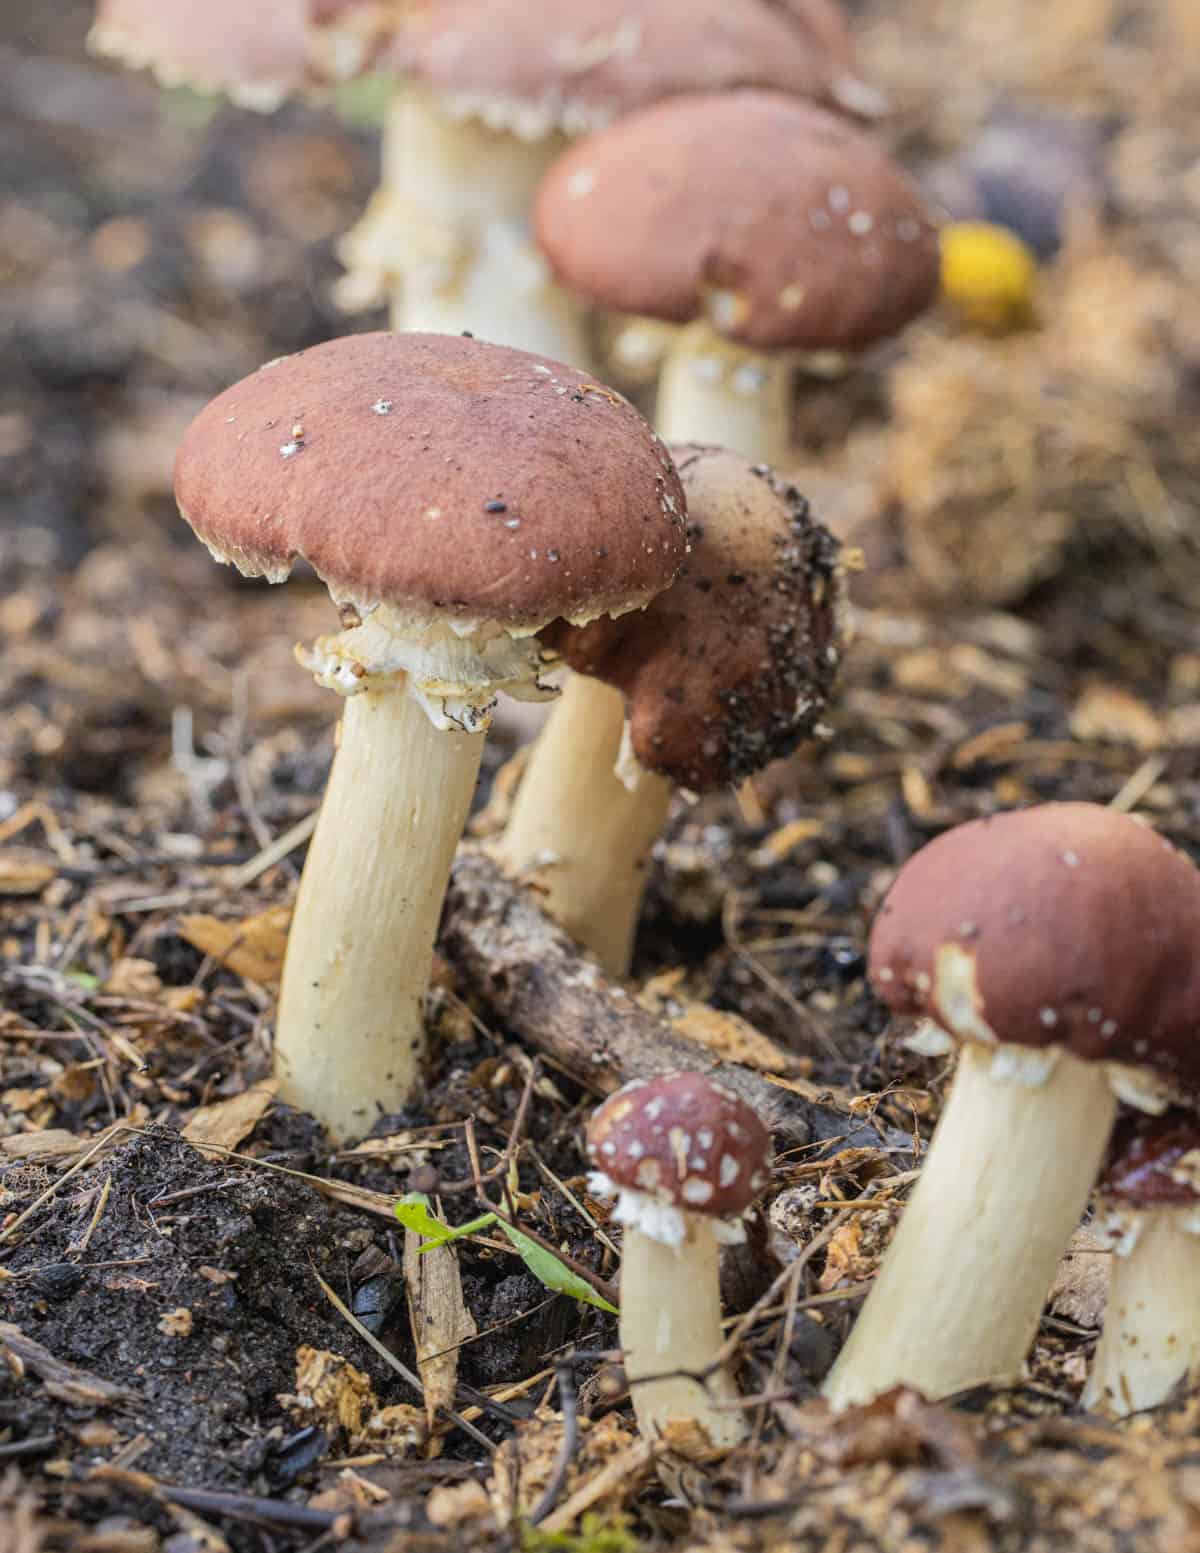 A Stropharia rugosoannulata mushroom growing from a wood chip pile 